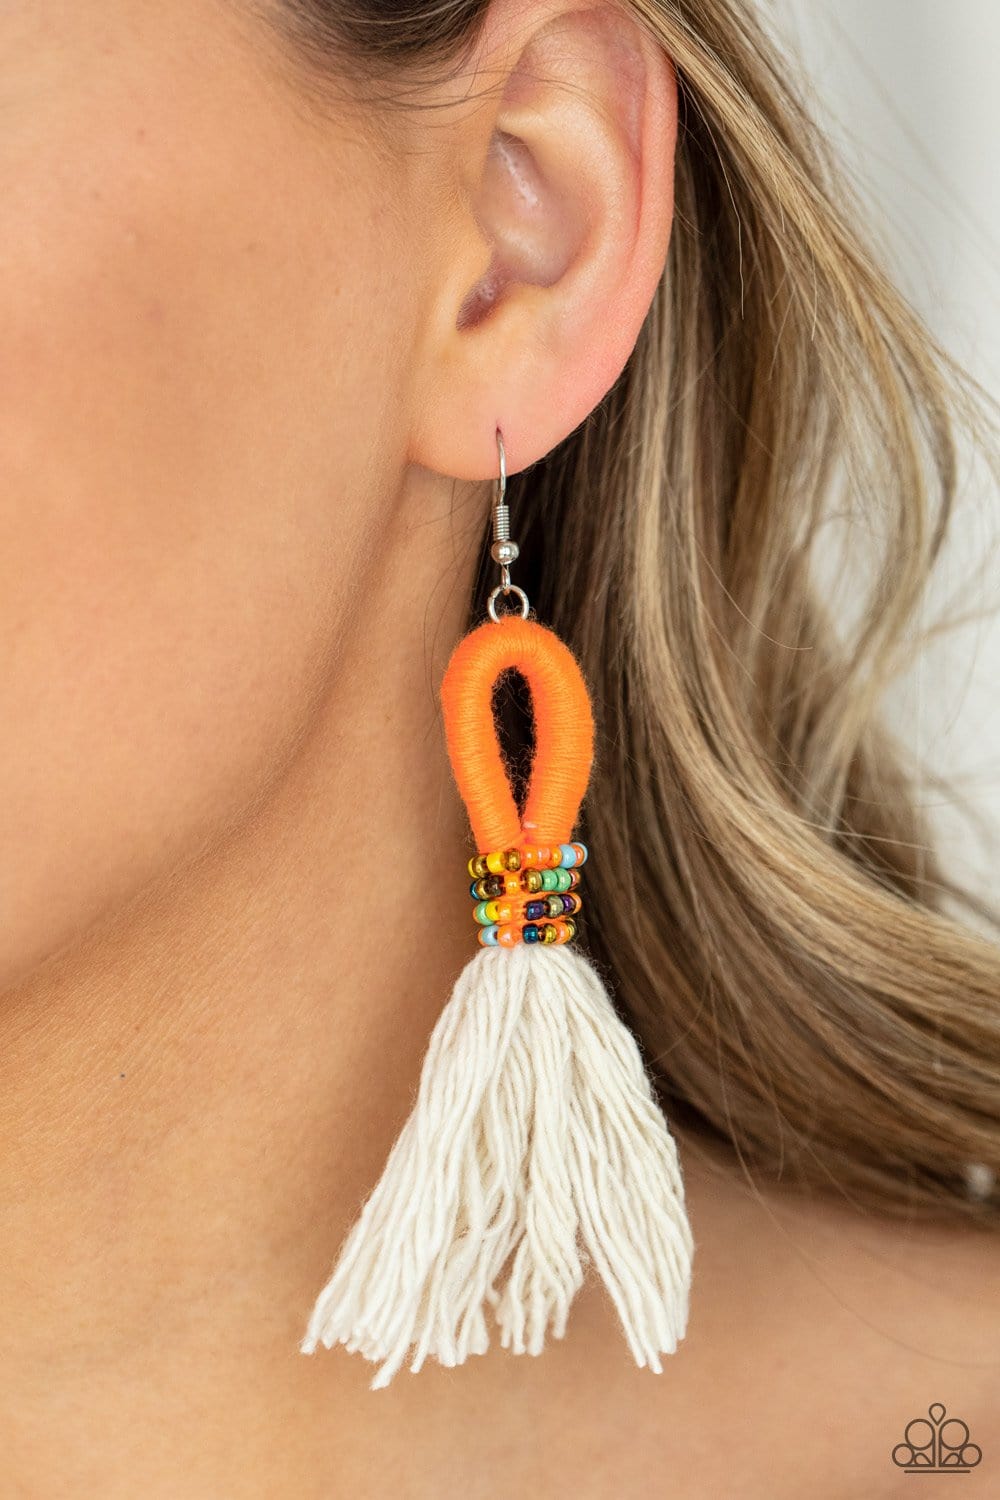 Paparazzi Accessories: The Dustup - Orange Seed Bead Earrings - Jewels N Thingz Boutique